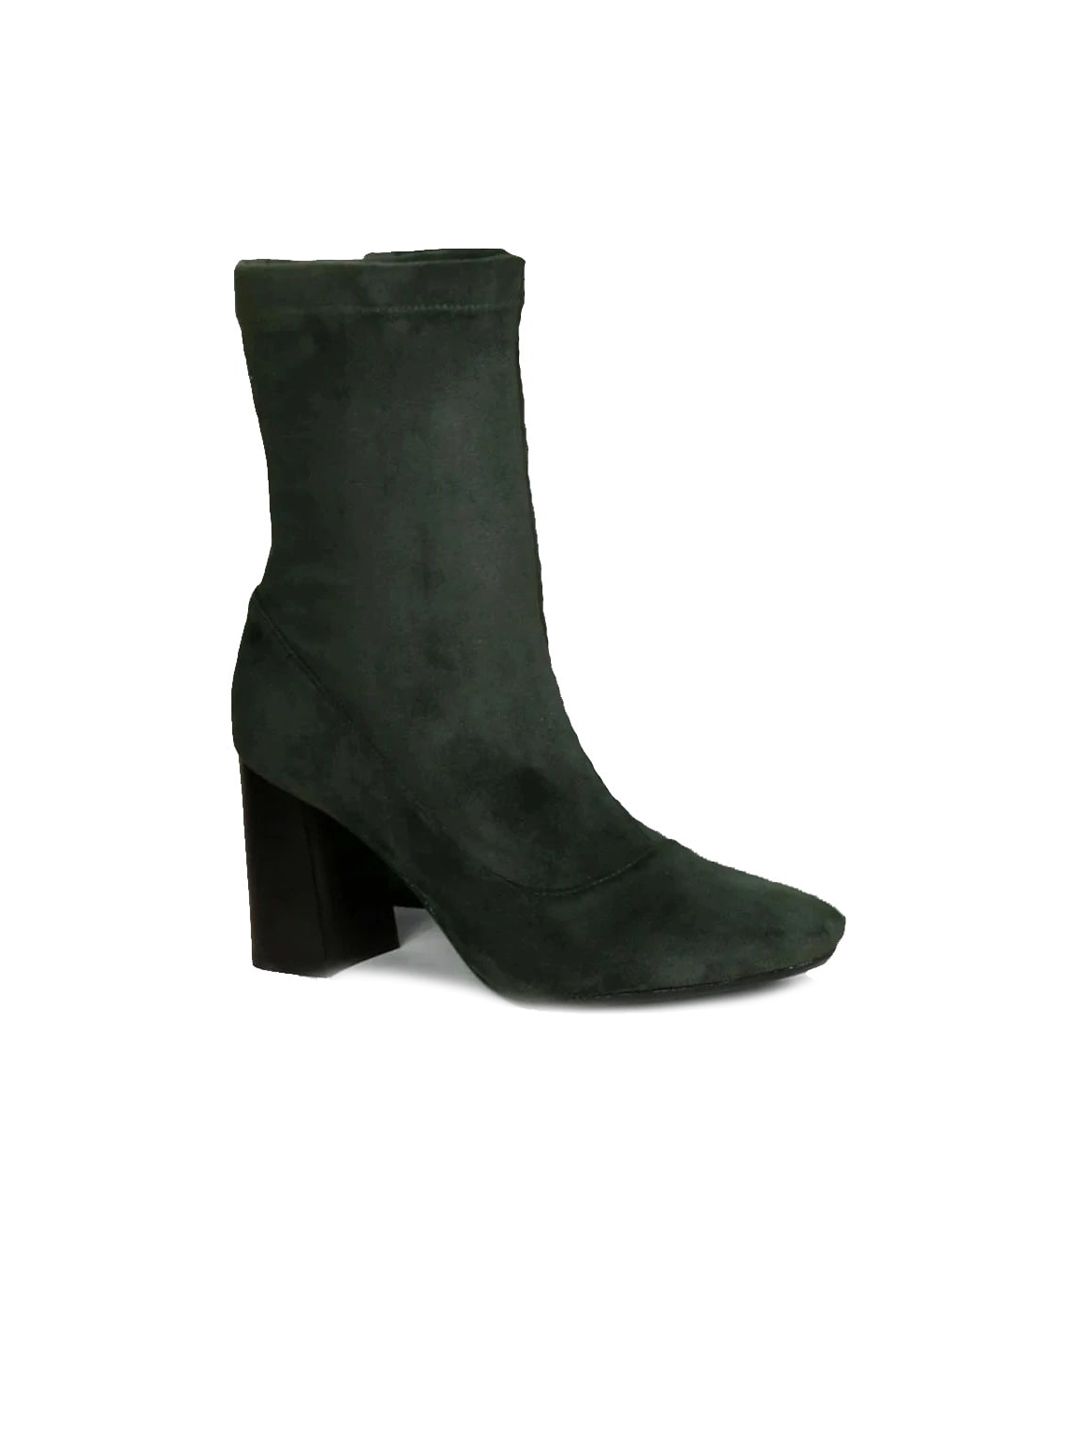 Saint G Grey Suede Block High-Ankle Heeled Boots Price in India